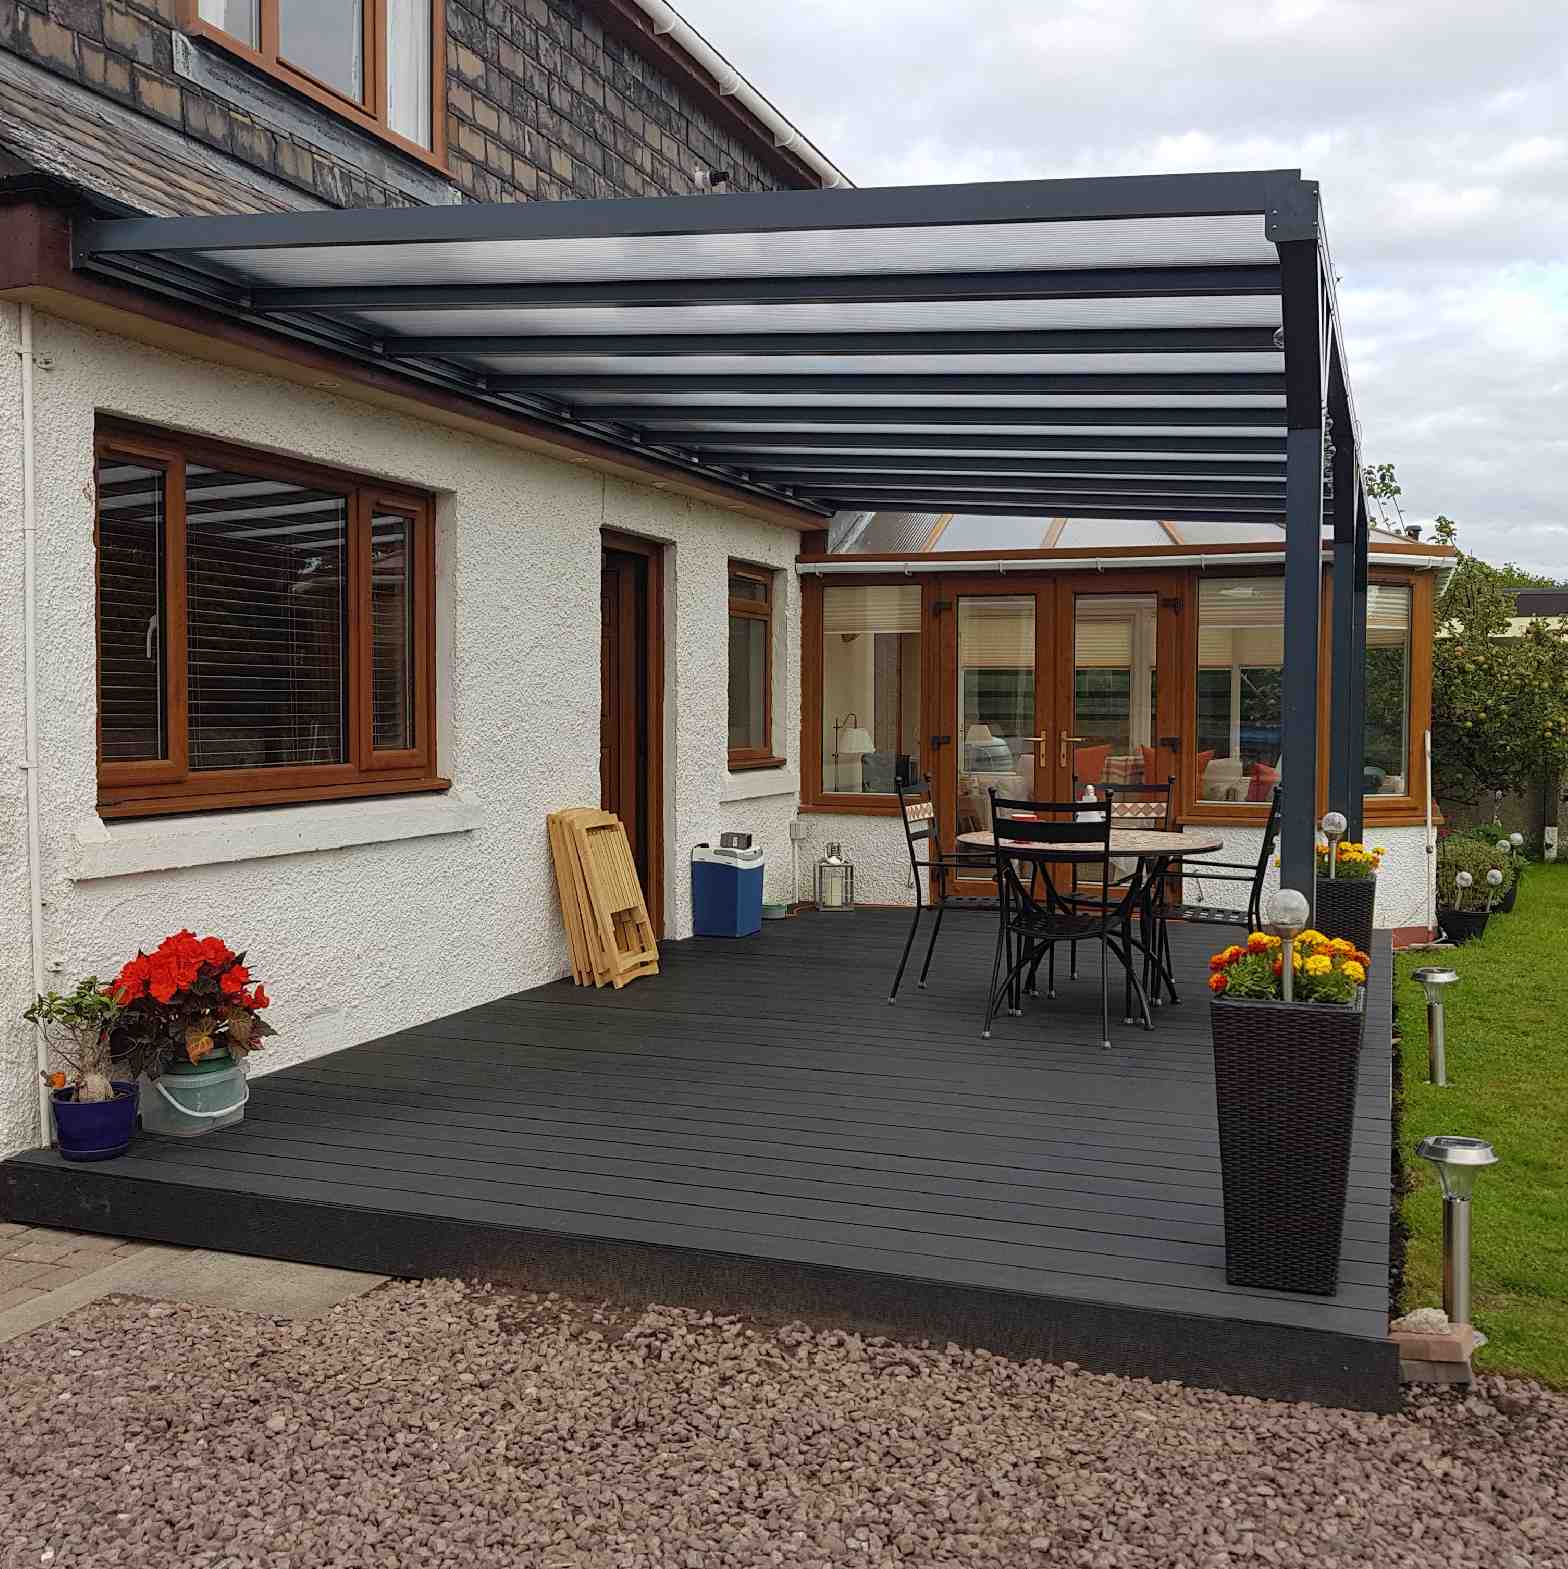 Buy Omega Verandah, Anthracite Grey, 16mm Polycarbonate Glazing - 3.1m (W) x 2.0m (P), (2) Supporting Posts online today